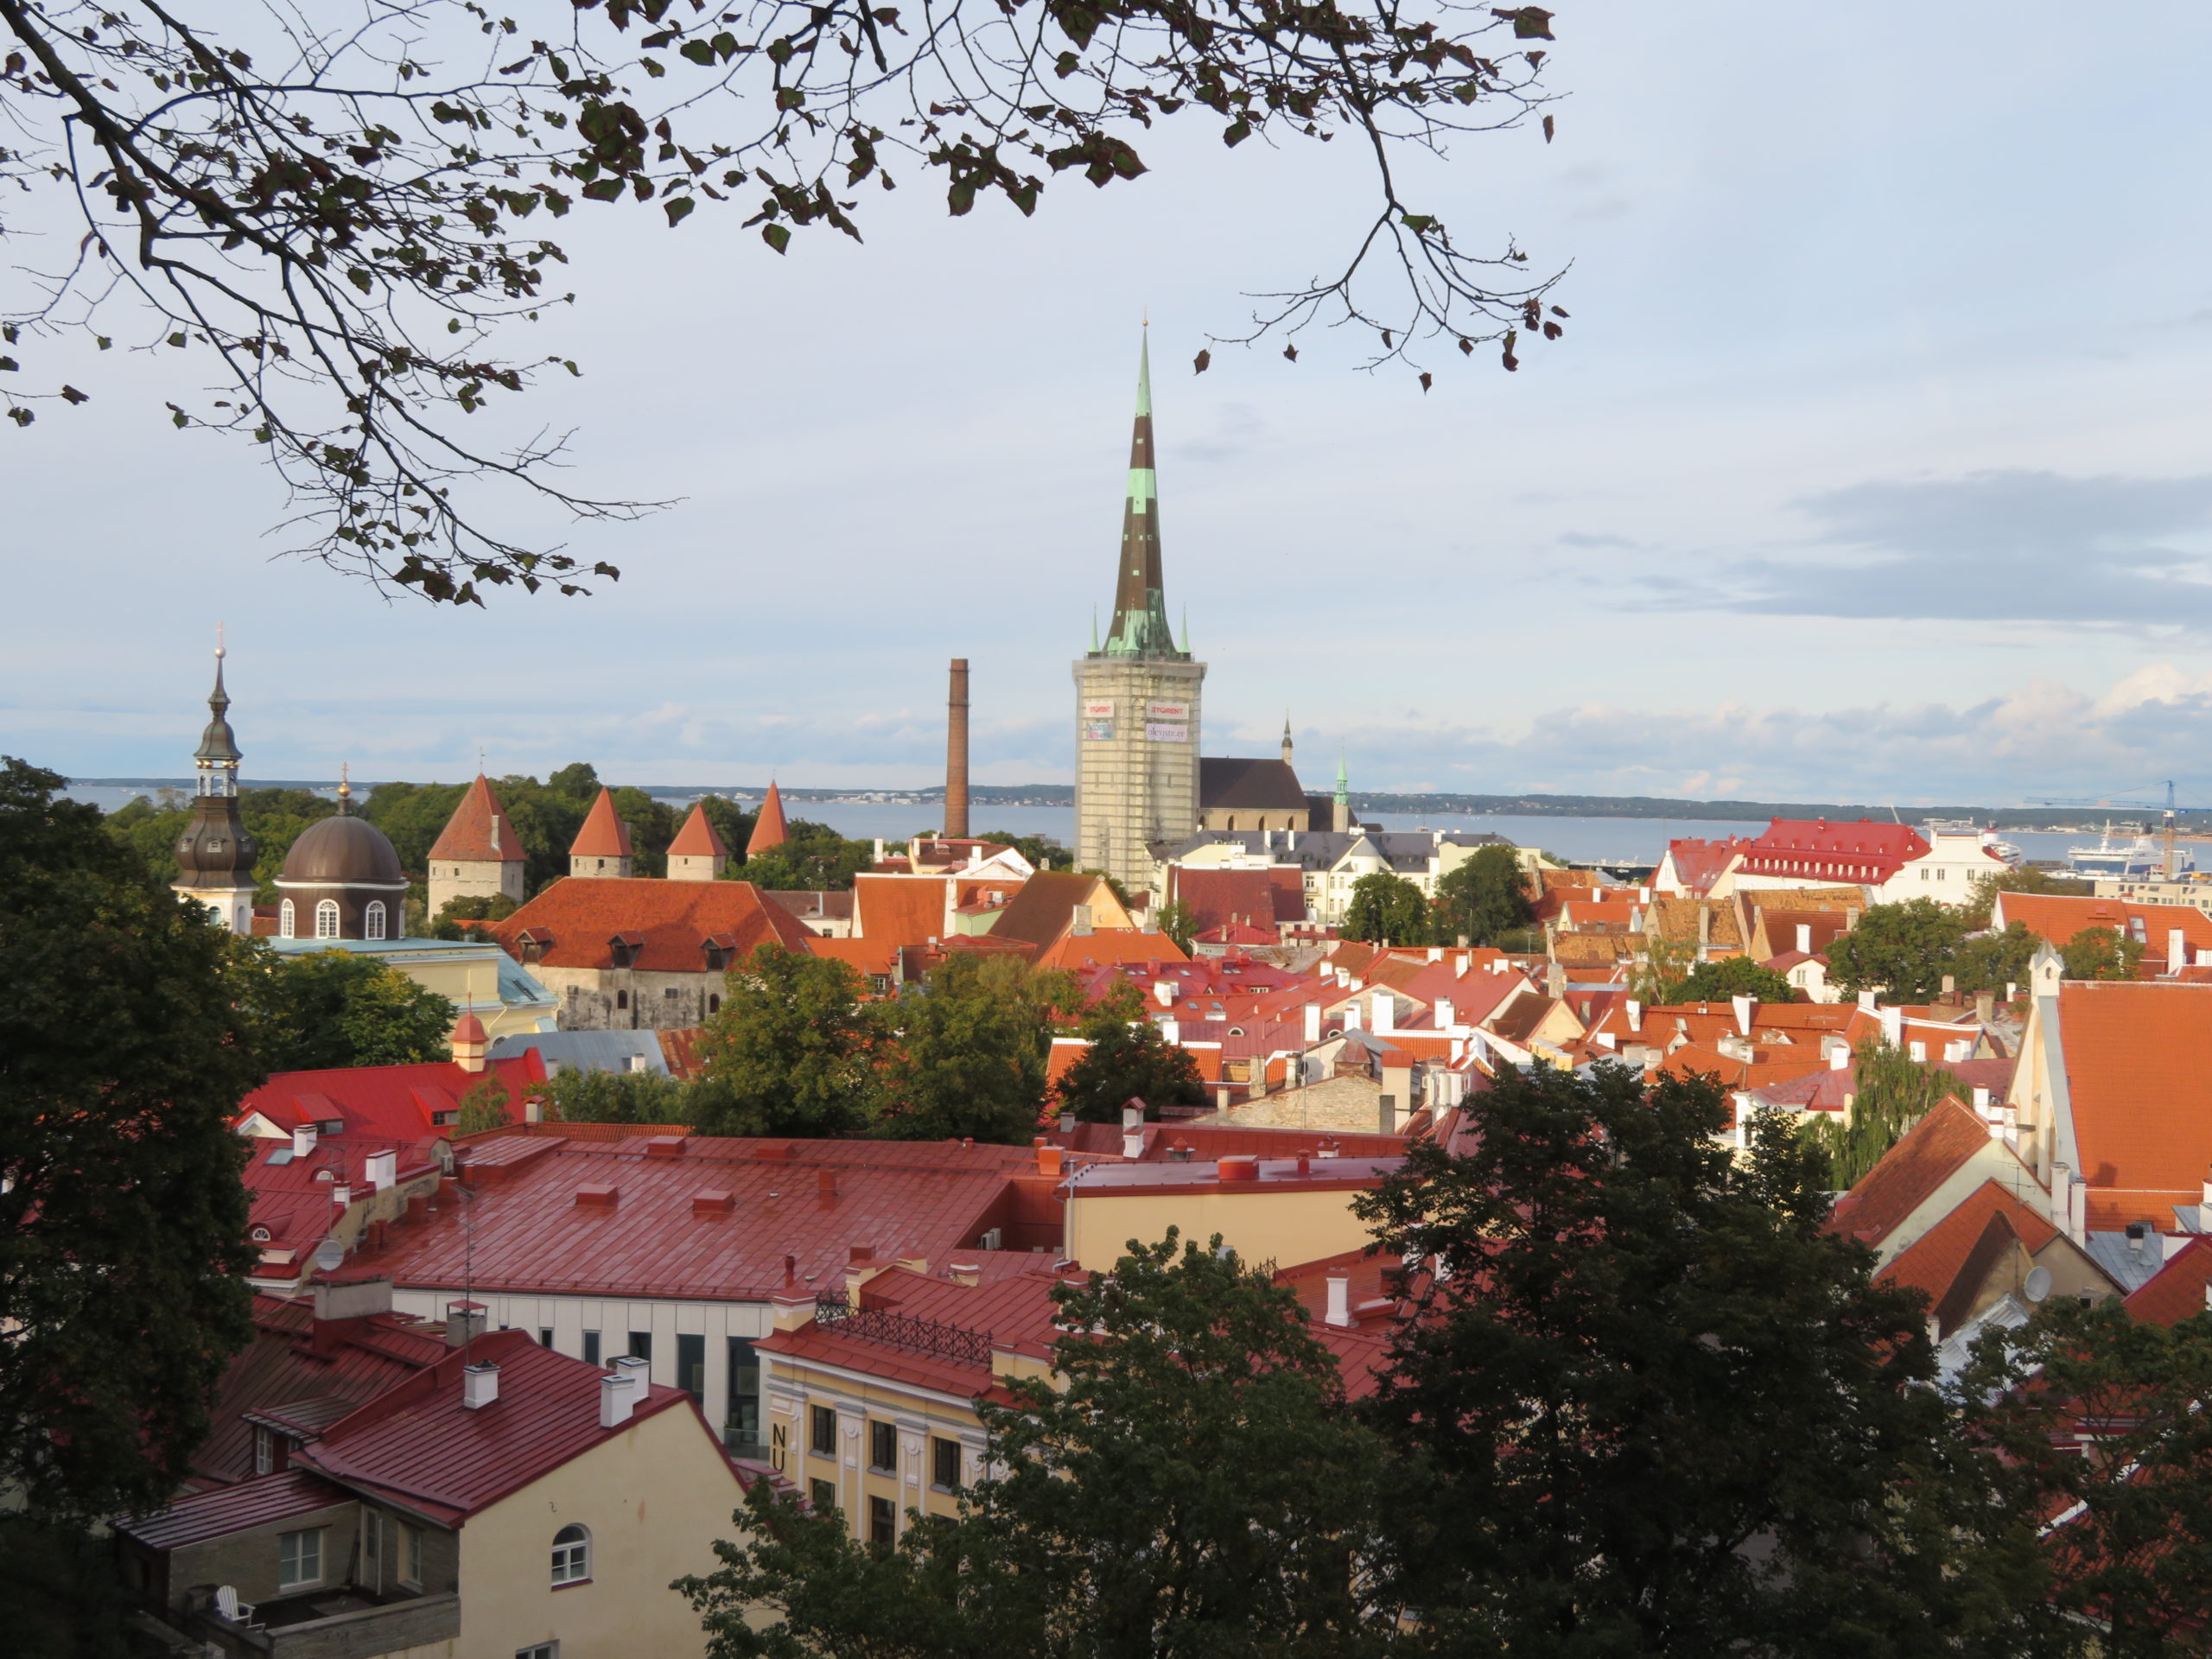 tallin estonia best viewpoints in the old town Kohtuotsa viewing platform things to see and do itinerary